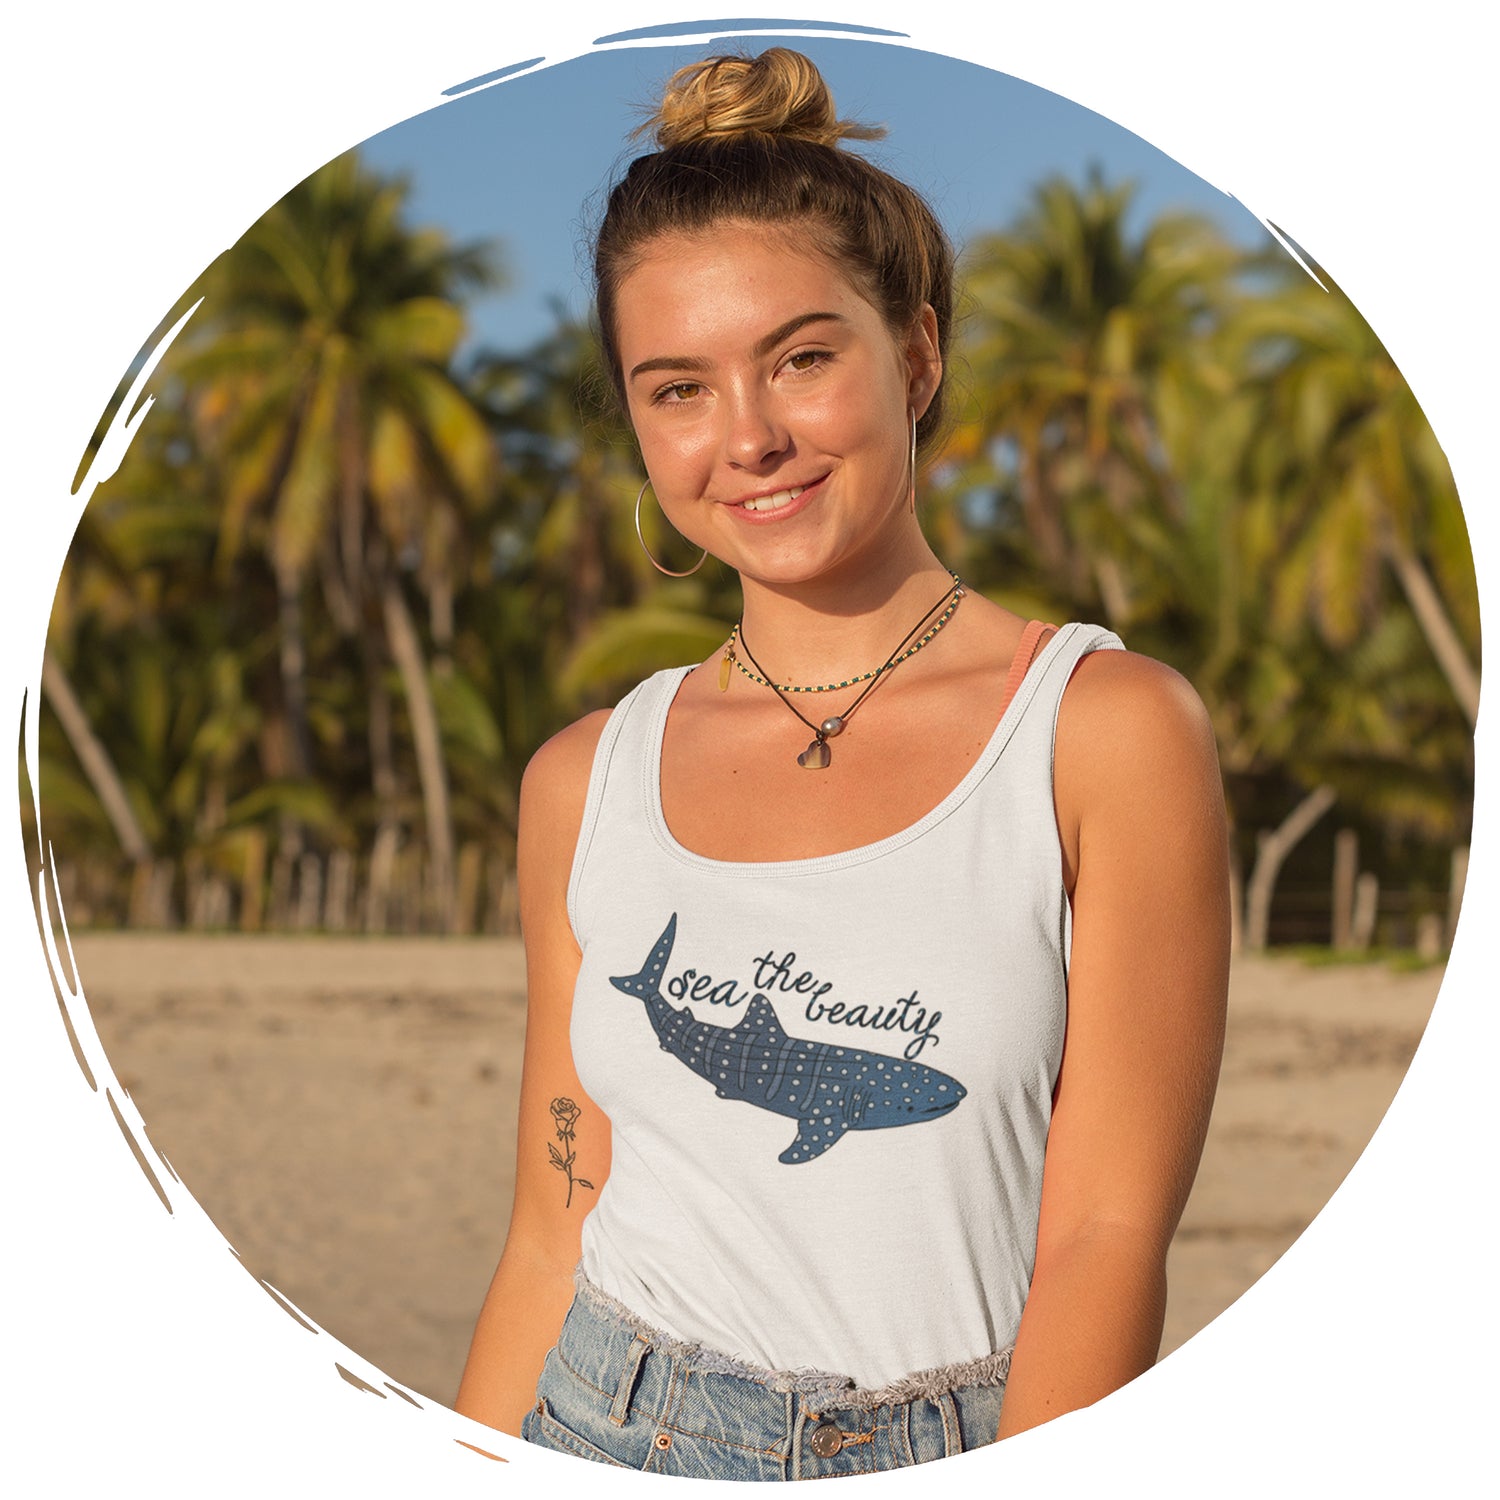 girl on beach with palm trees in background wearing Connected Clothing Company's Sea The Beauty Whale Shark Tank Top - Connected Clothing Company Brand Ambassador Program